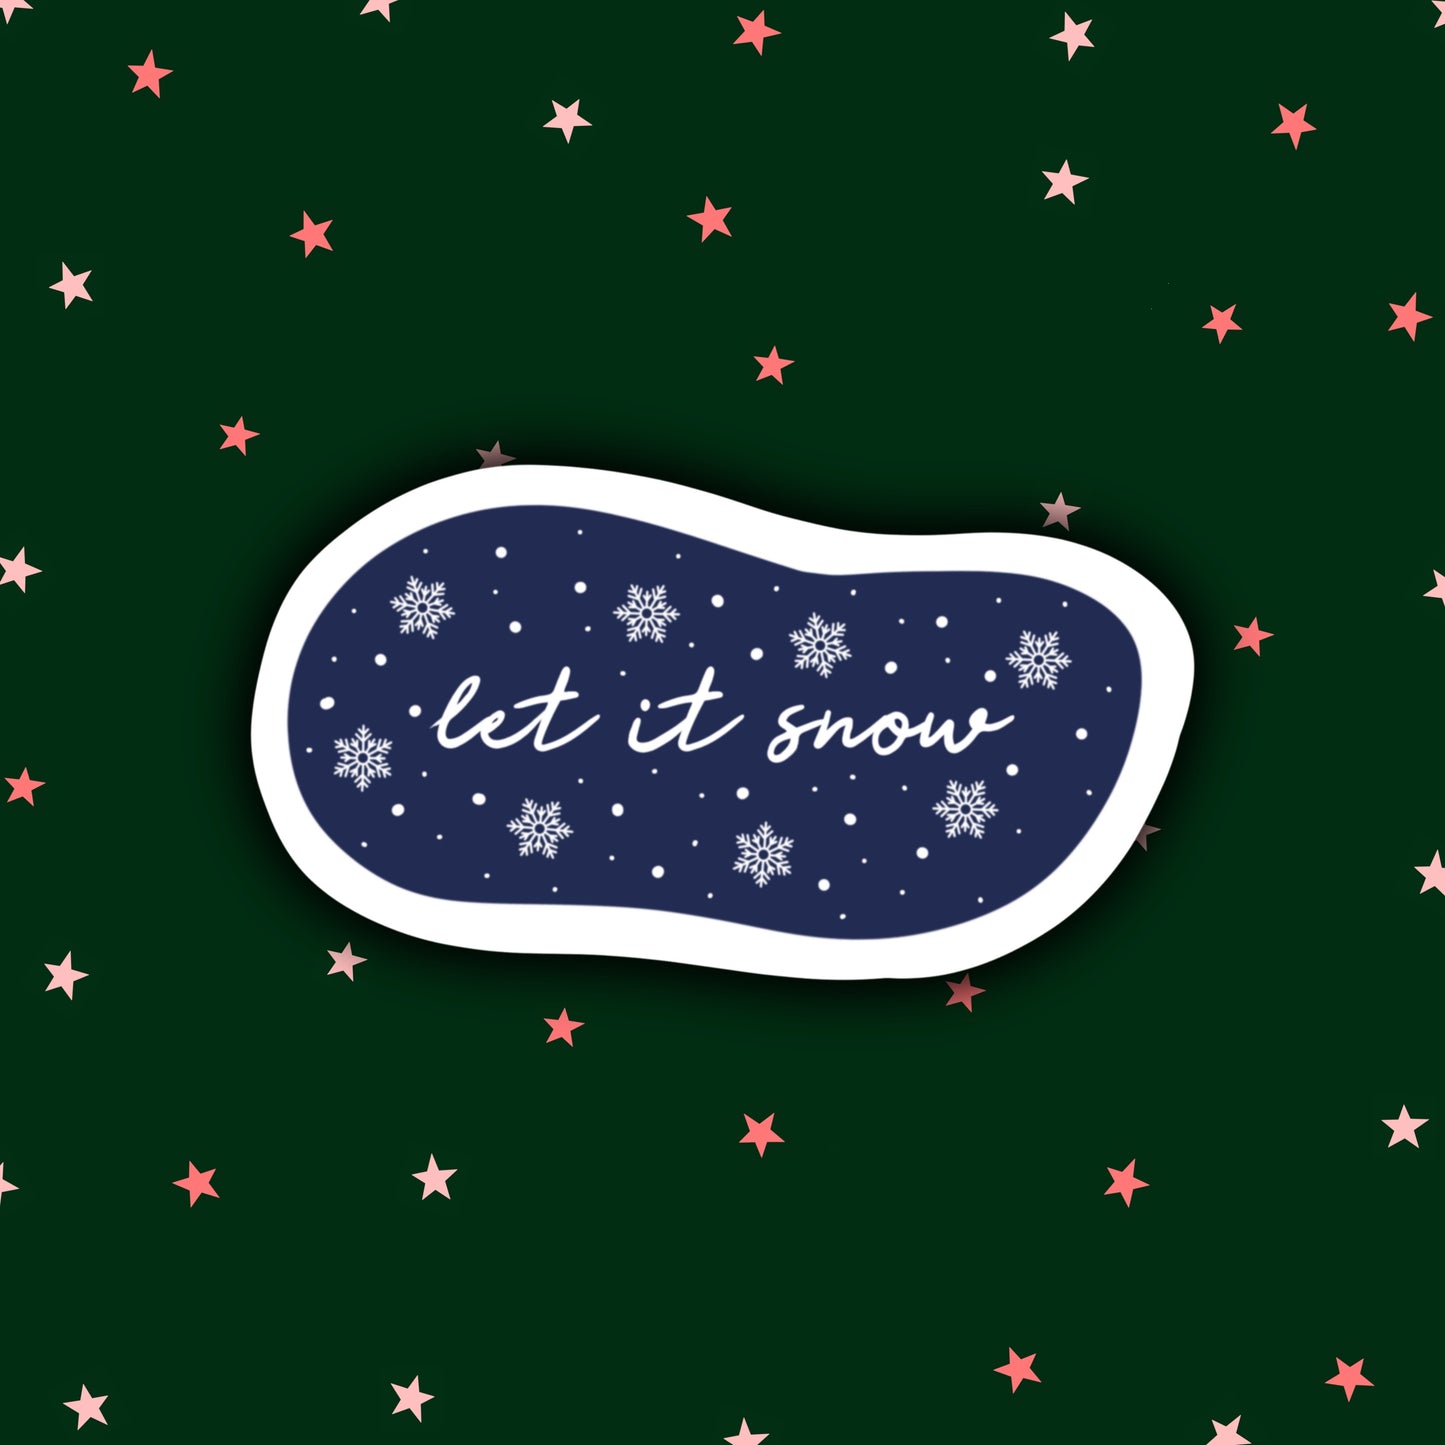 Let It Snow! | Christmas Songs